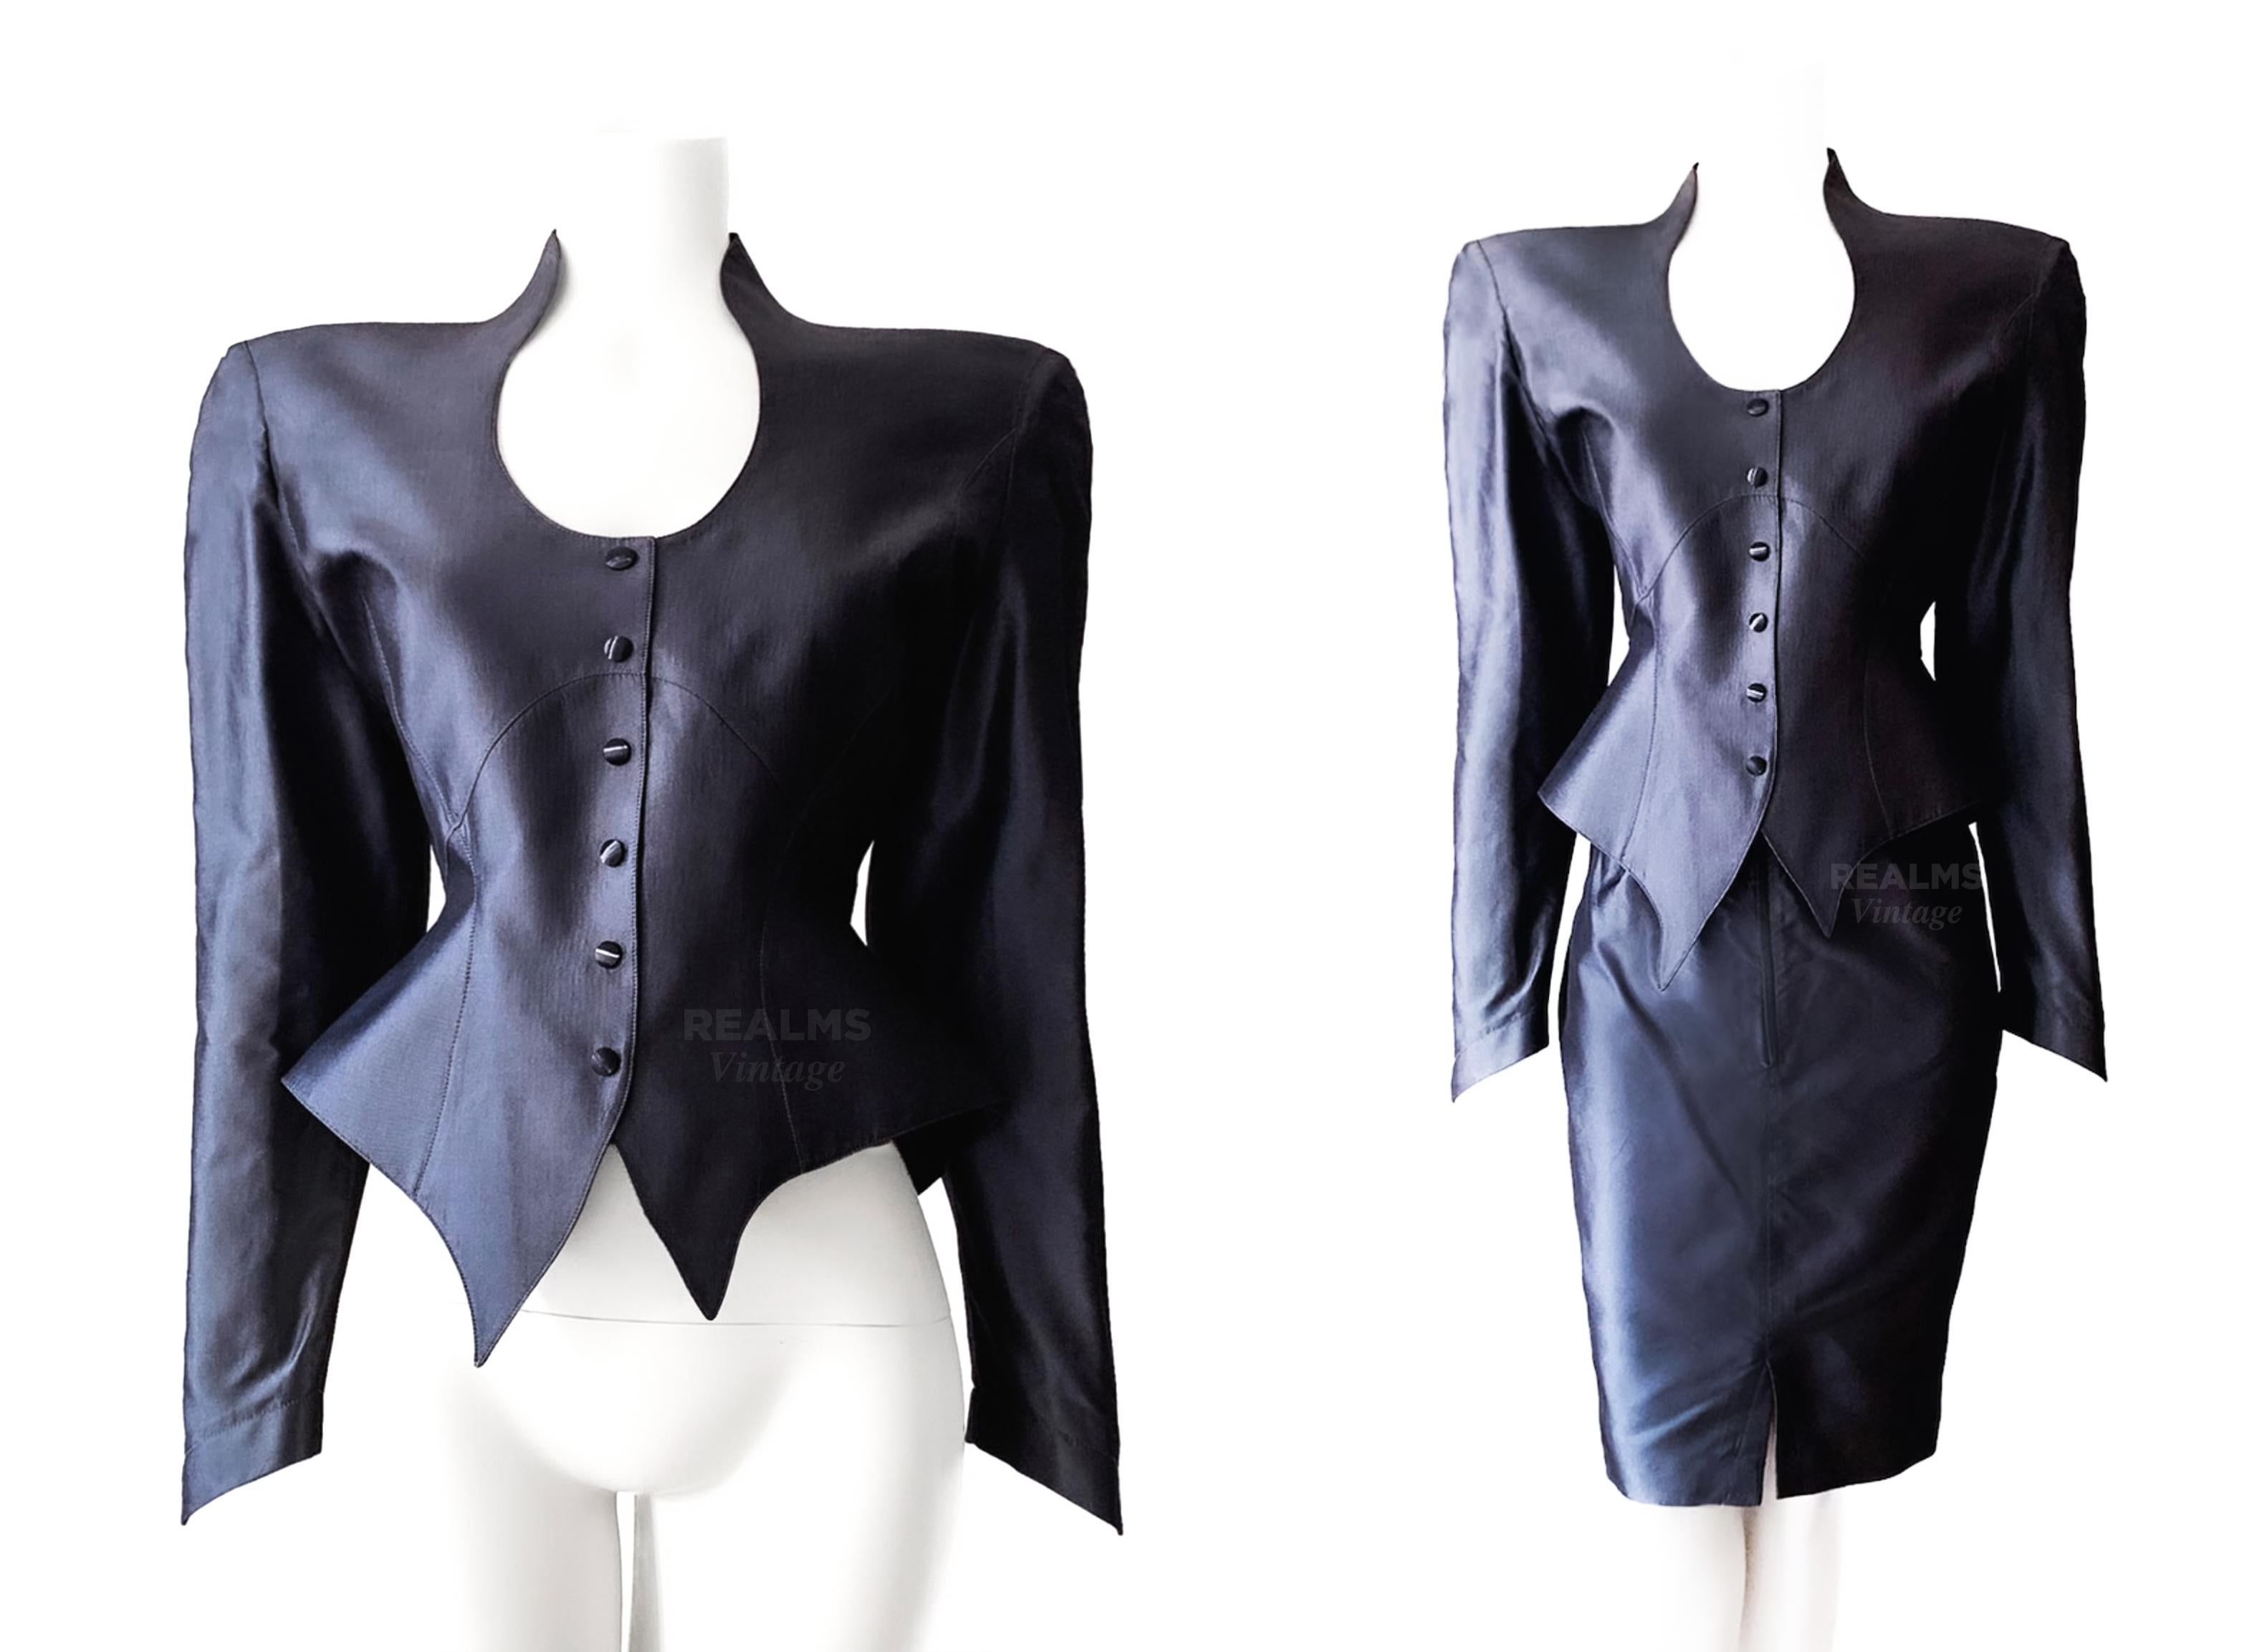 
The most stunning pure silk Thierry Mugler ensemble. Sooo Mugleresque! The combination of extraordinary avant-garde shape: pointy asymmetric hem and fitted horglass silhouette & luxurious elegance in high quality silk material.

Pure Silk Vintage